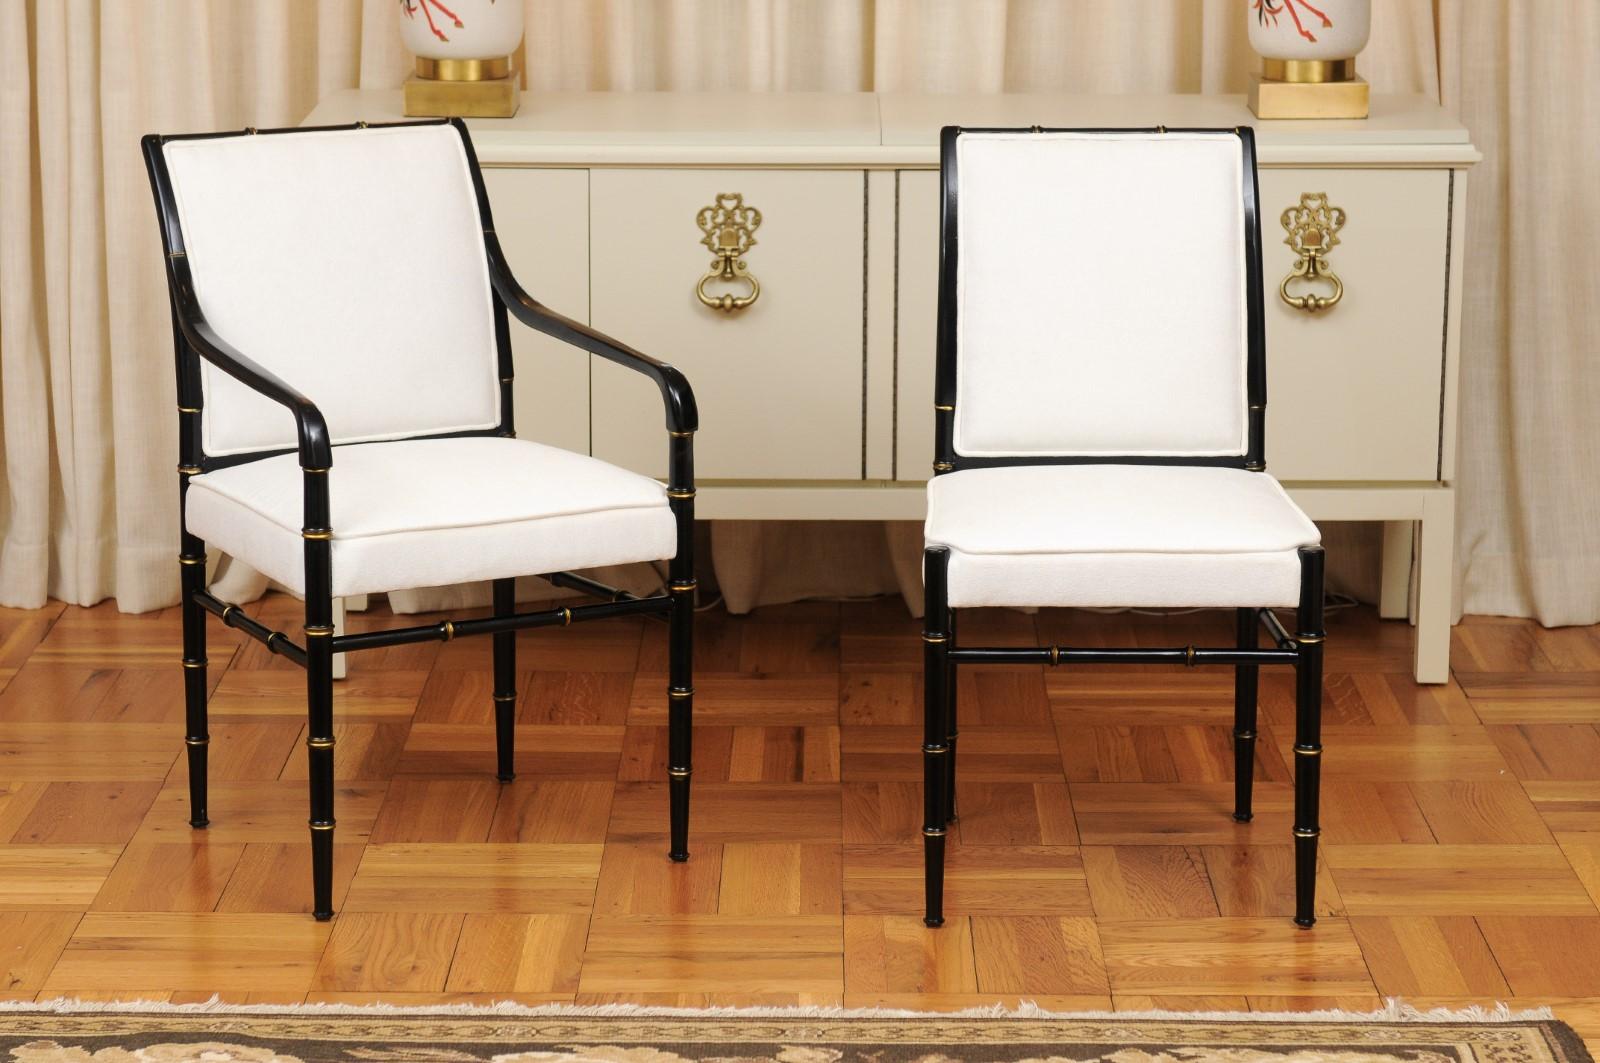 These magnificent dining chairs are shipped as professionally photographed and described in the listing narrative, completely installation ready. Expert custom upholstery service is available.

A sophisticated set of eight (8) meticulously